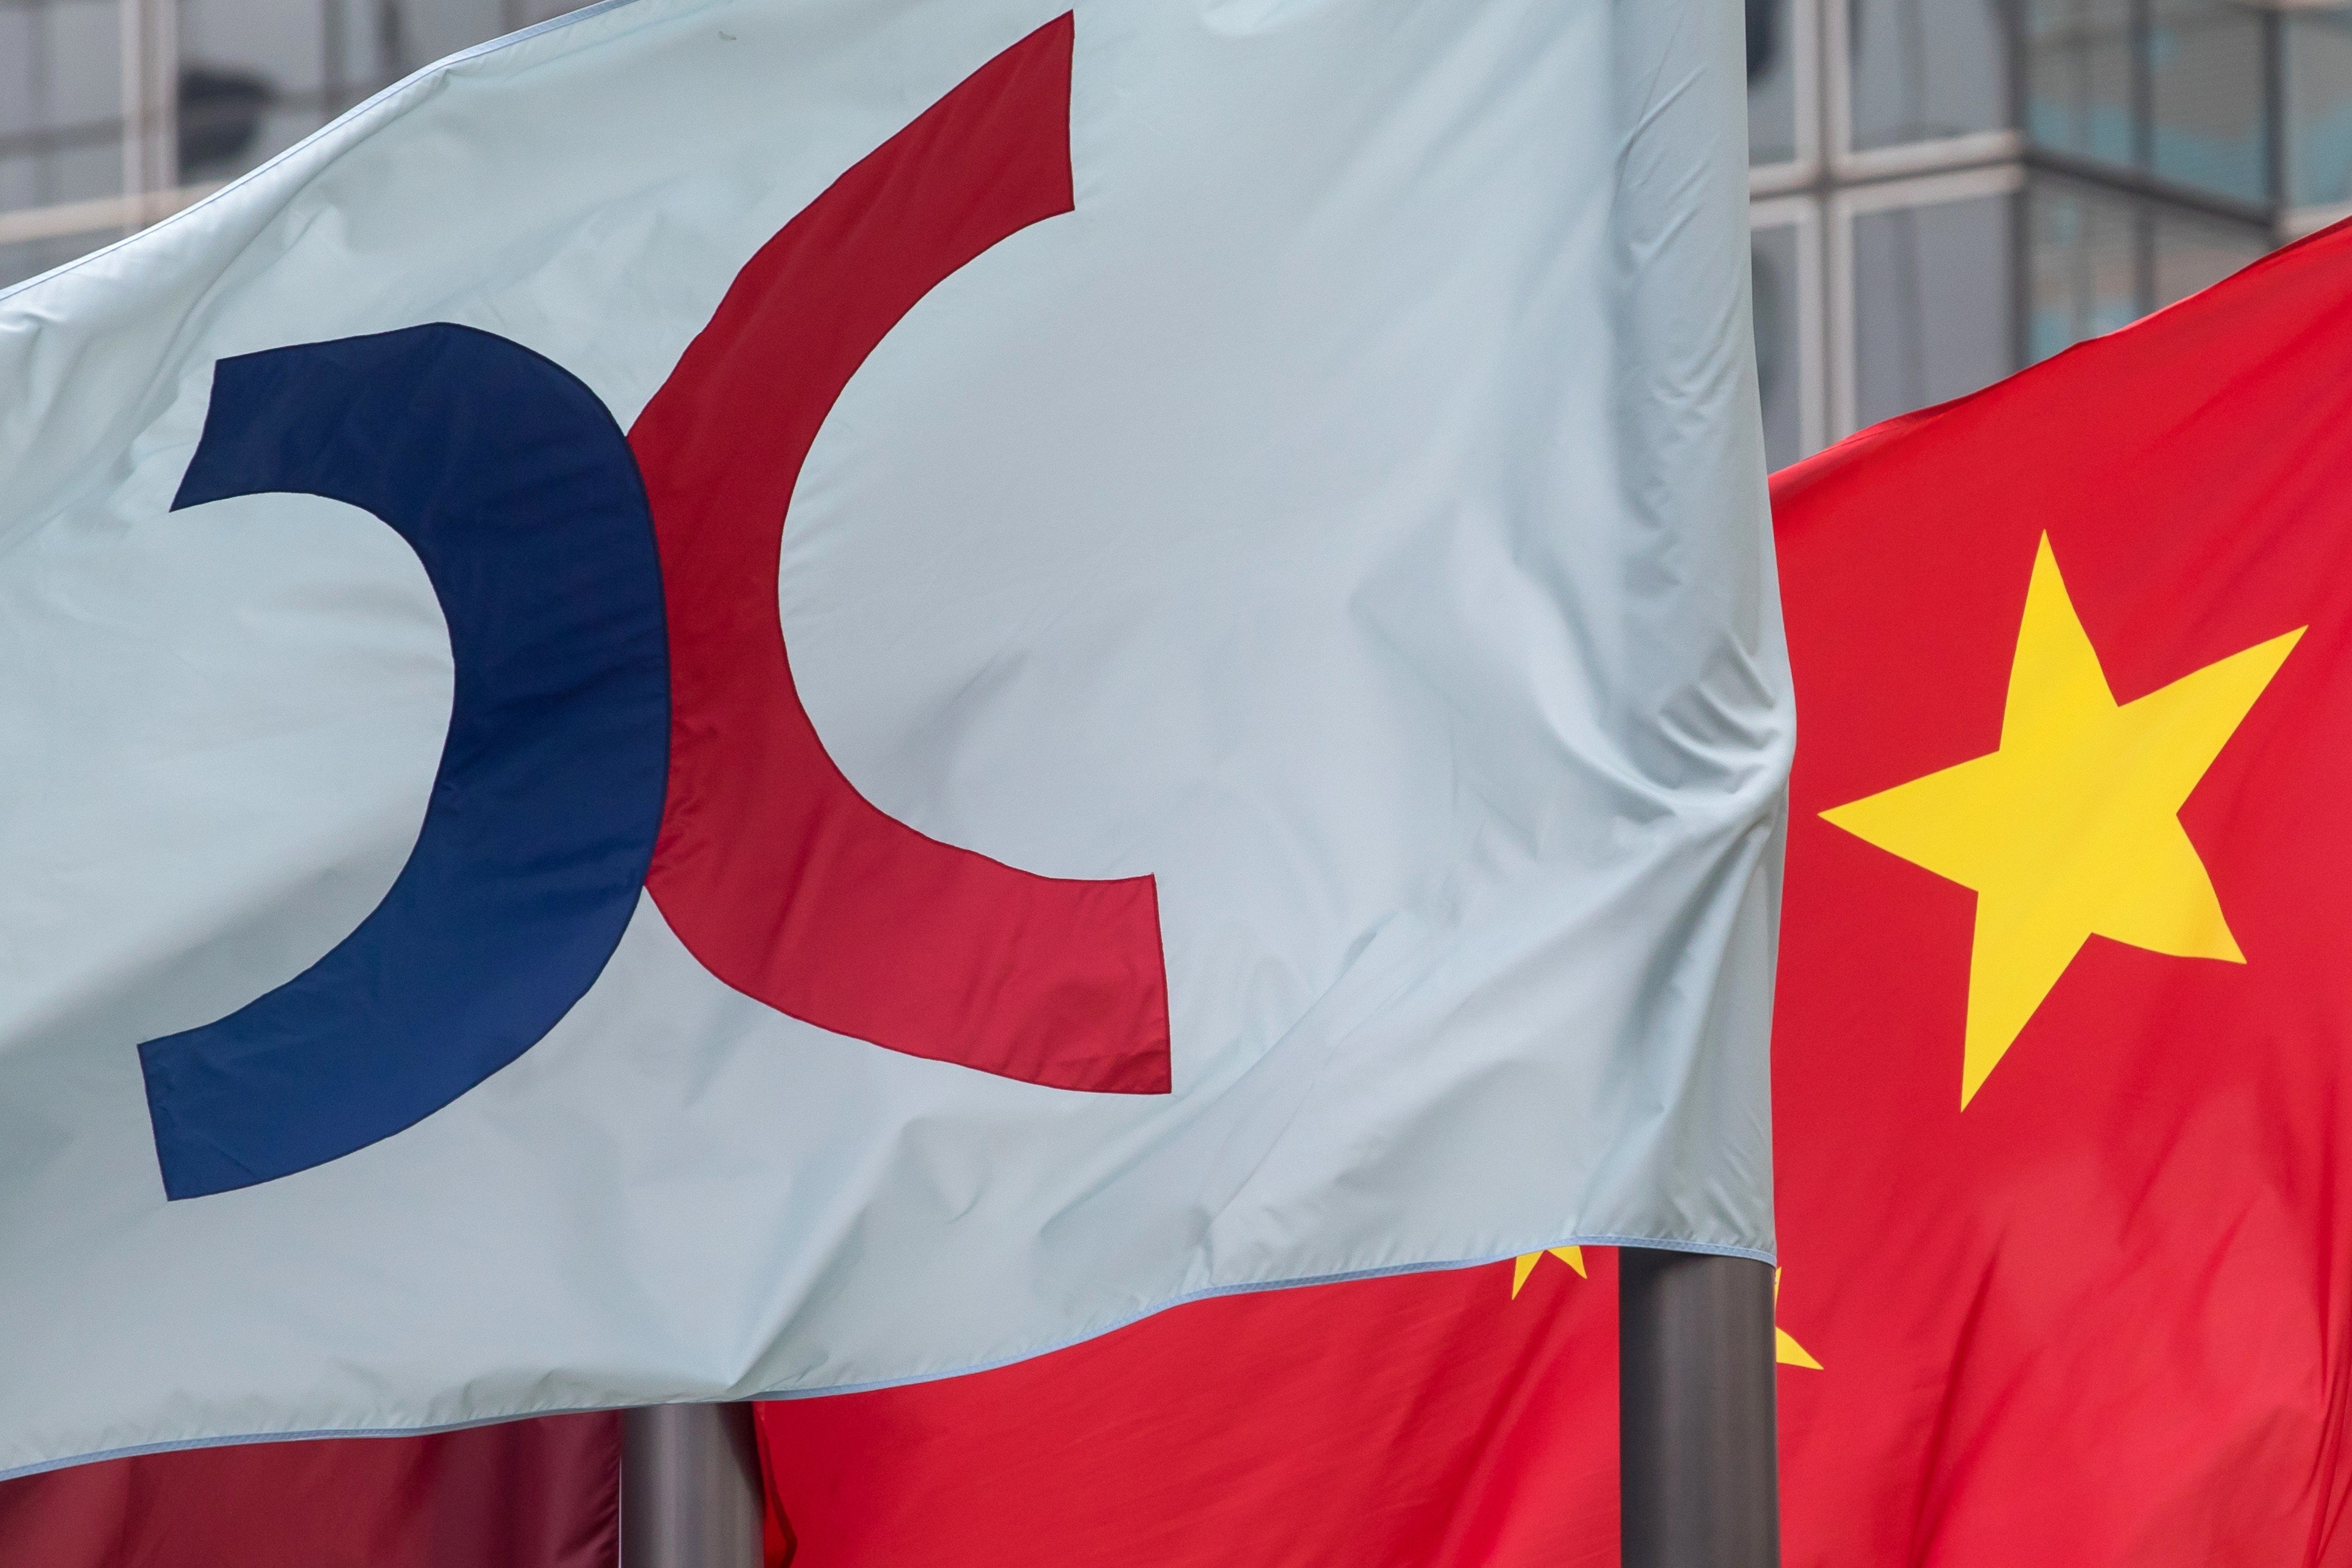 The HKEX corporate flag flying alongside the Chinese flag outside the Exchange Square complex in Hong Kong, on September 16. China’s growth is slowing but the rest of Asia is still among the fastest-growing regions for capital markets issuance and wealth creation. Photo: Bloomberg